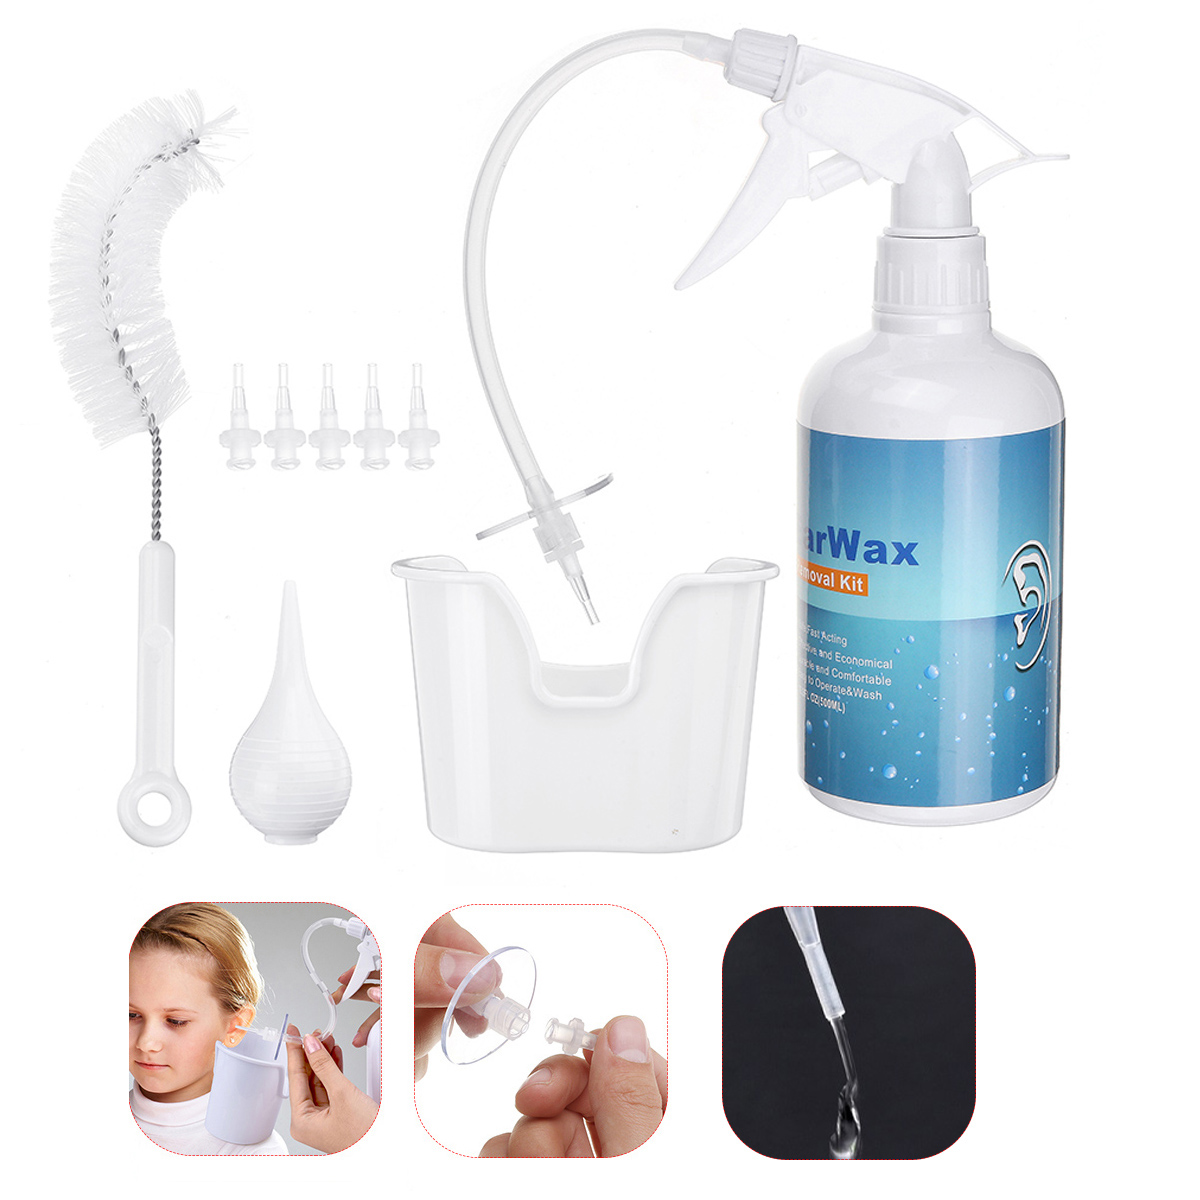 

Ear Wax Remover Syringe Kit Soft Removal Cleaner Tool Set